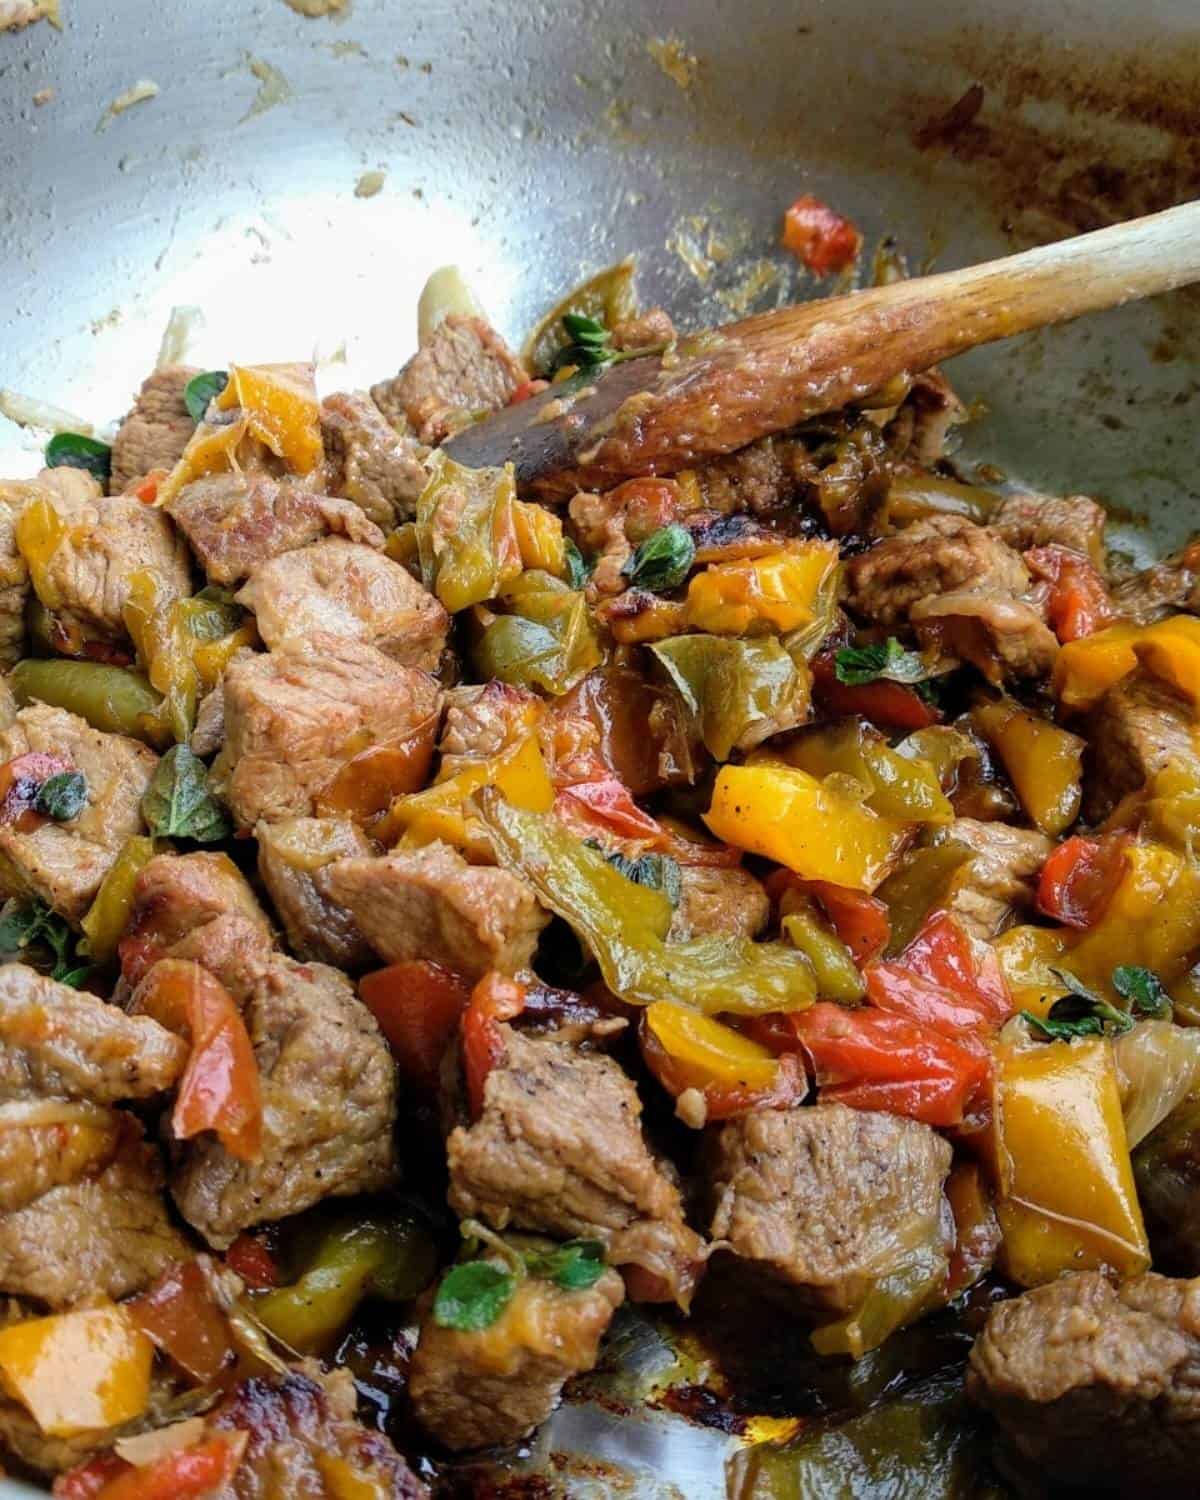 Tossing the Peppers Beef Stew with a wooden spoon.